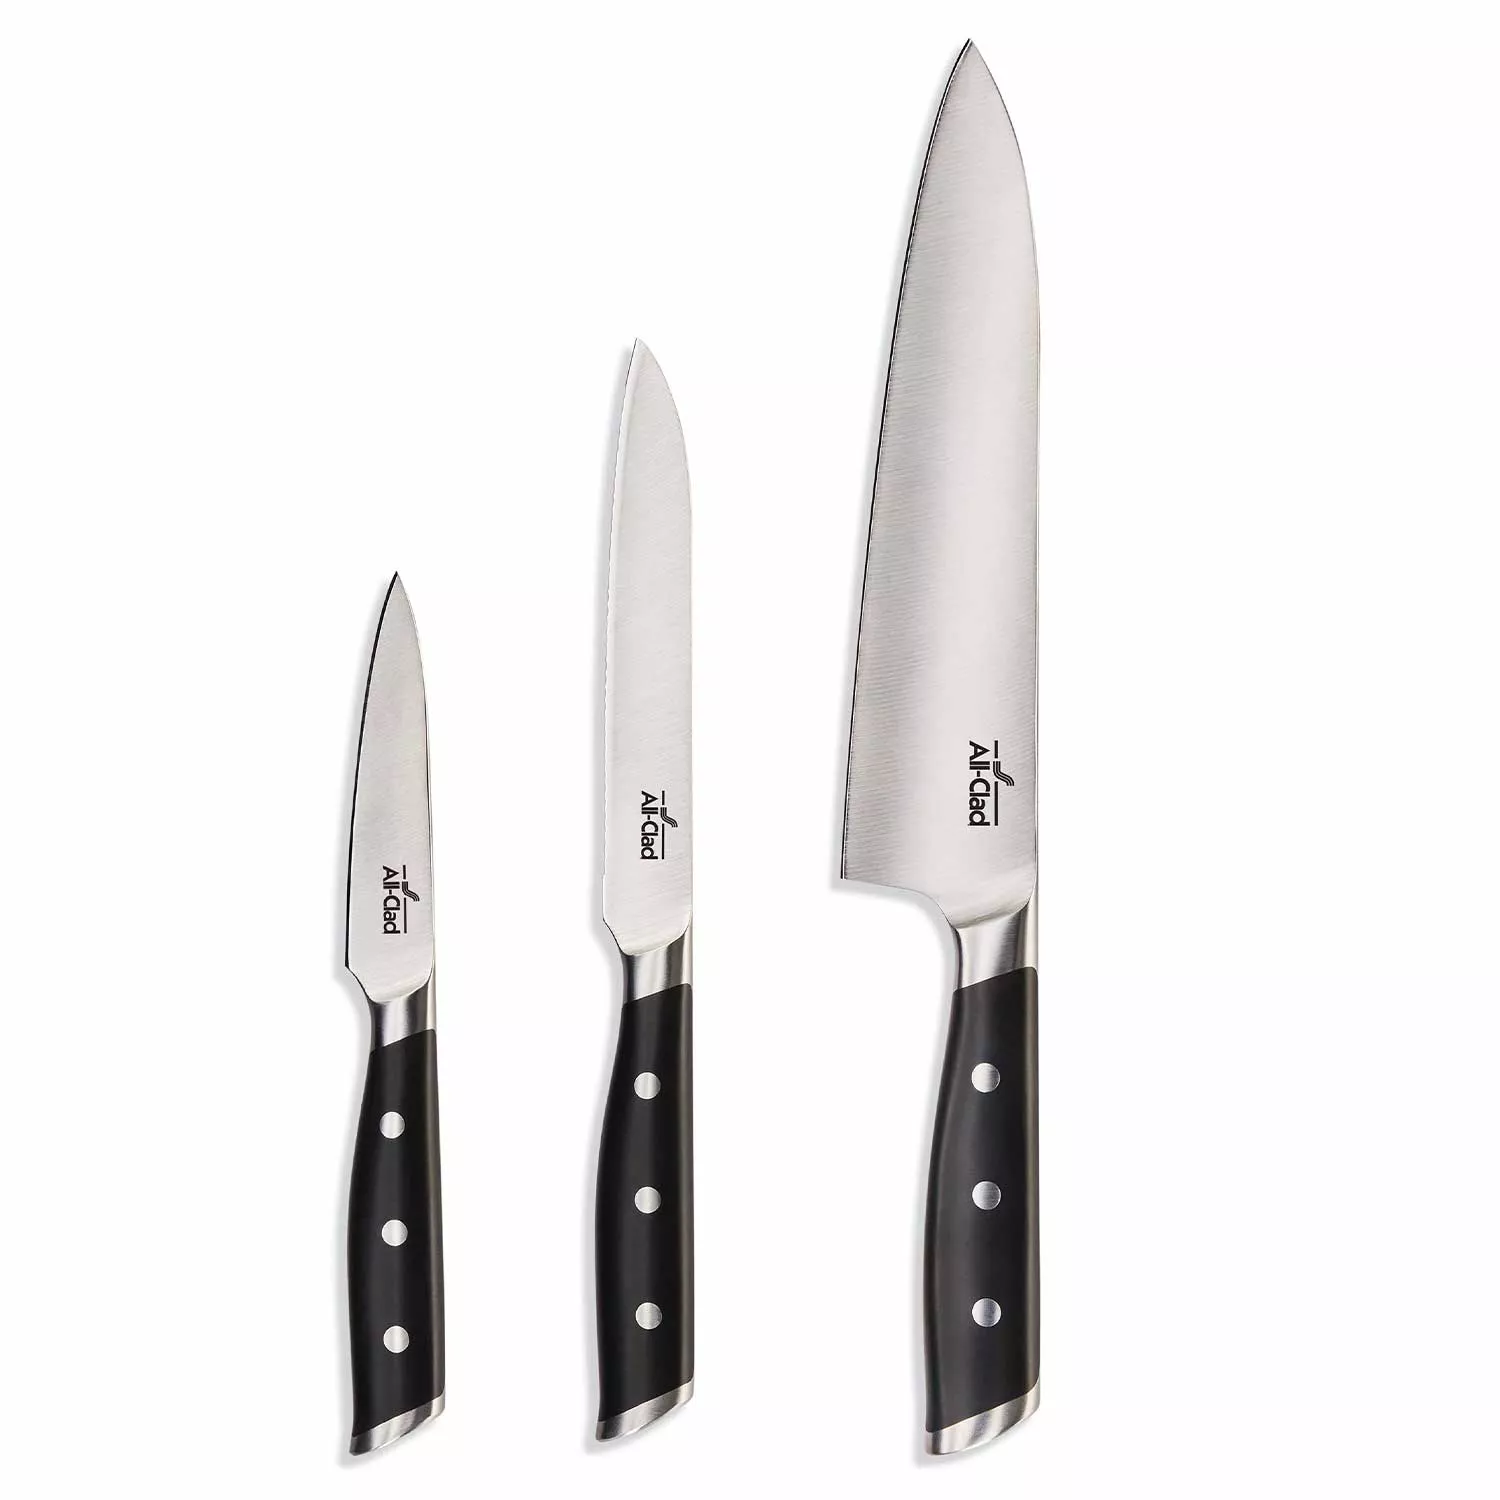 All-Clad Forged Chef's, Utility & Paring Knife Set, Black